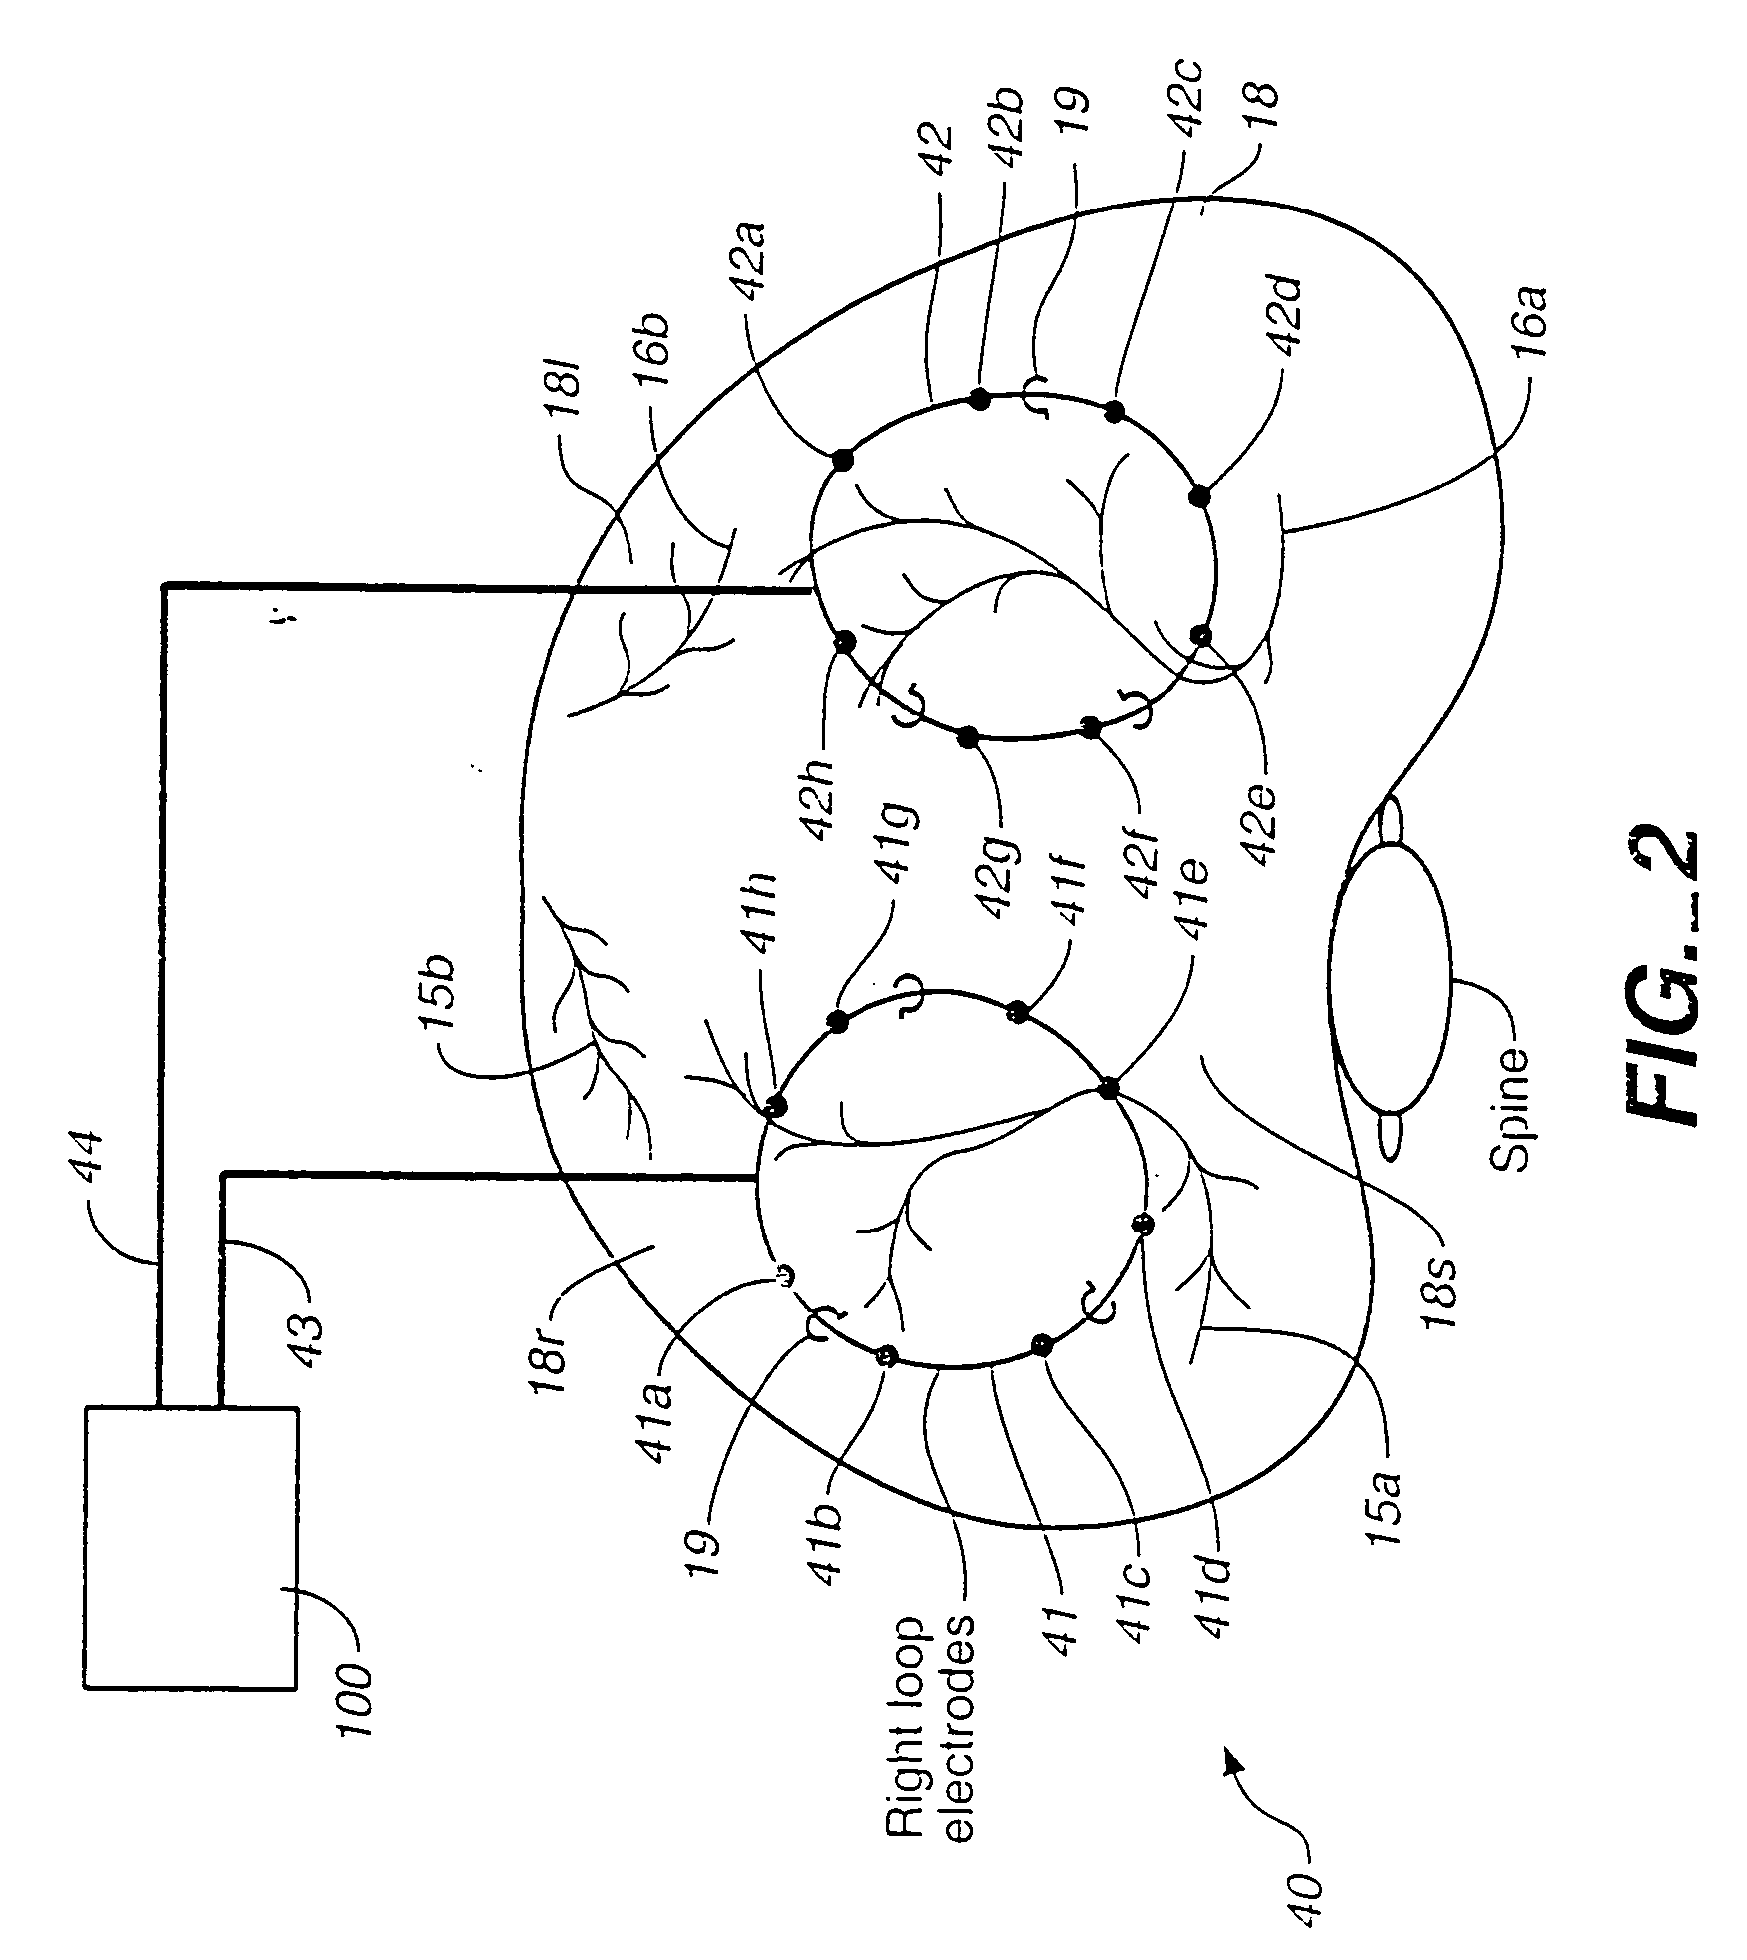 Breathing disorder detection and therapy device for providing intrinsic breathing